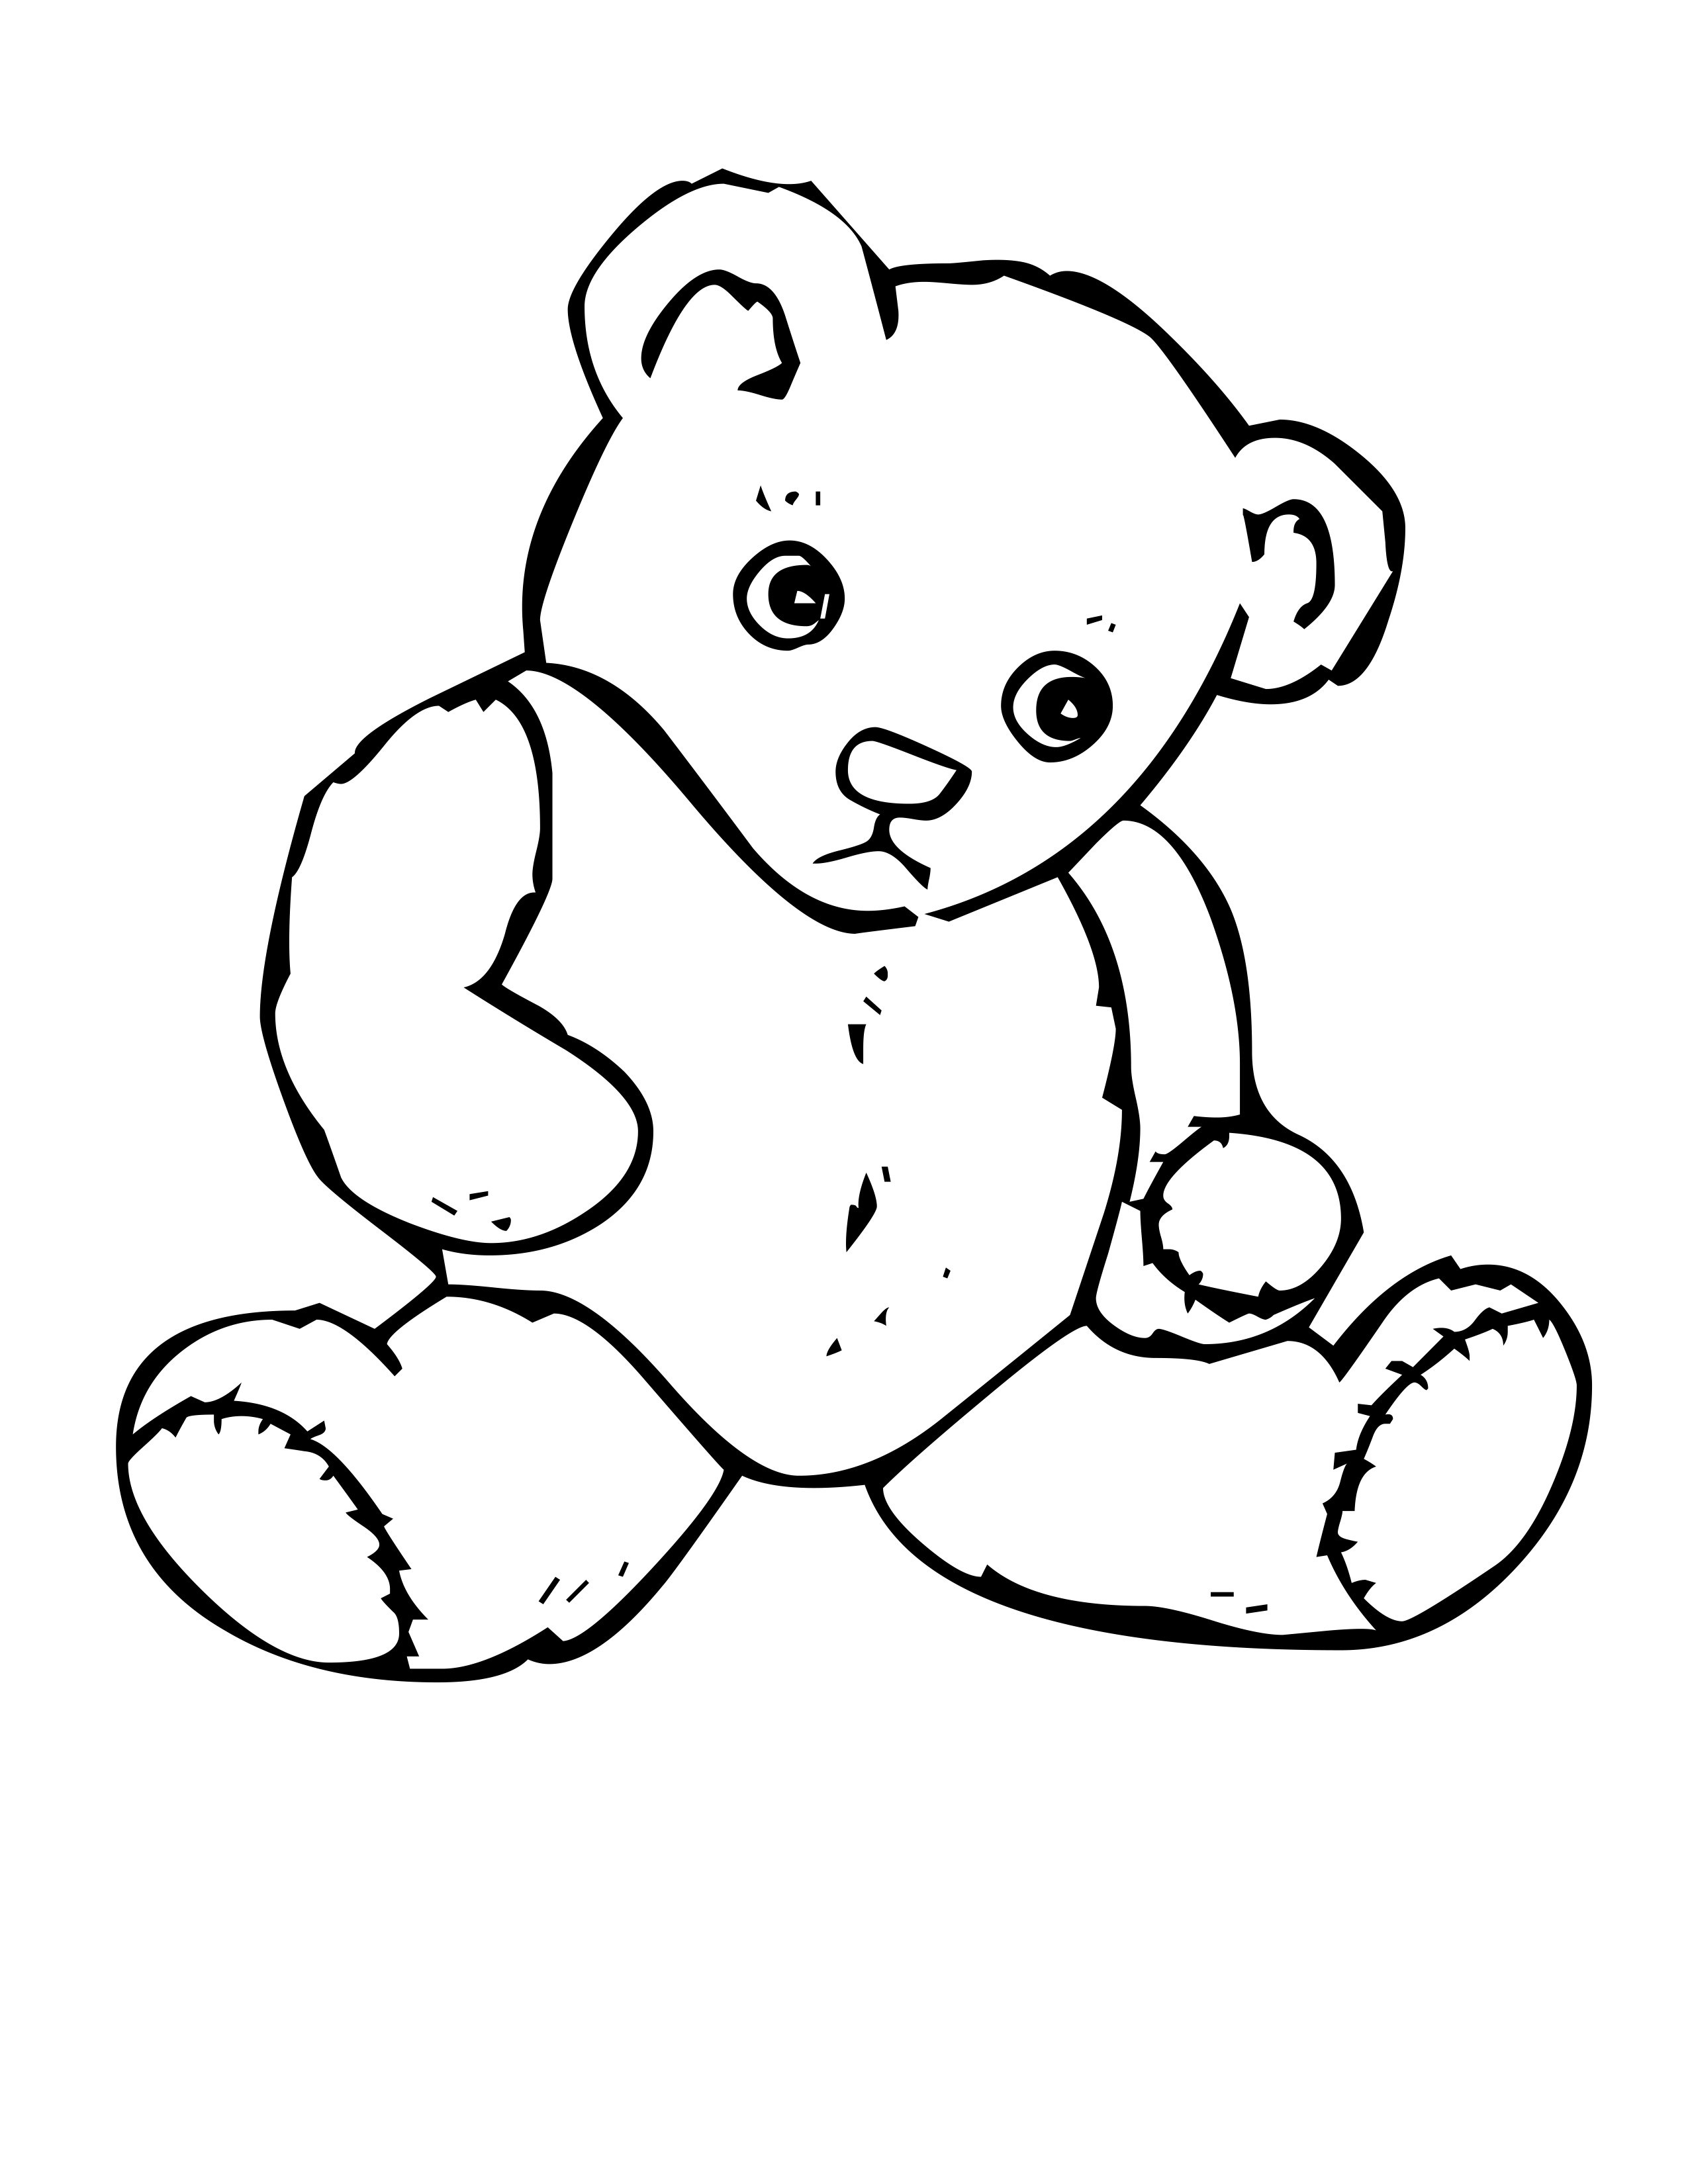 Teddy Bear Coloring Sheet. teddy bear coloring pages gt gt disney ...